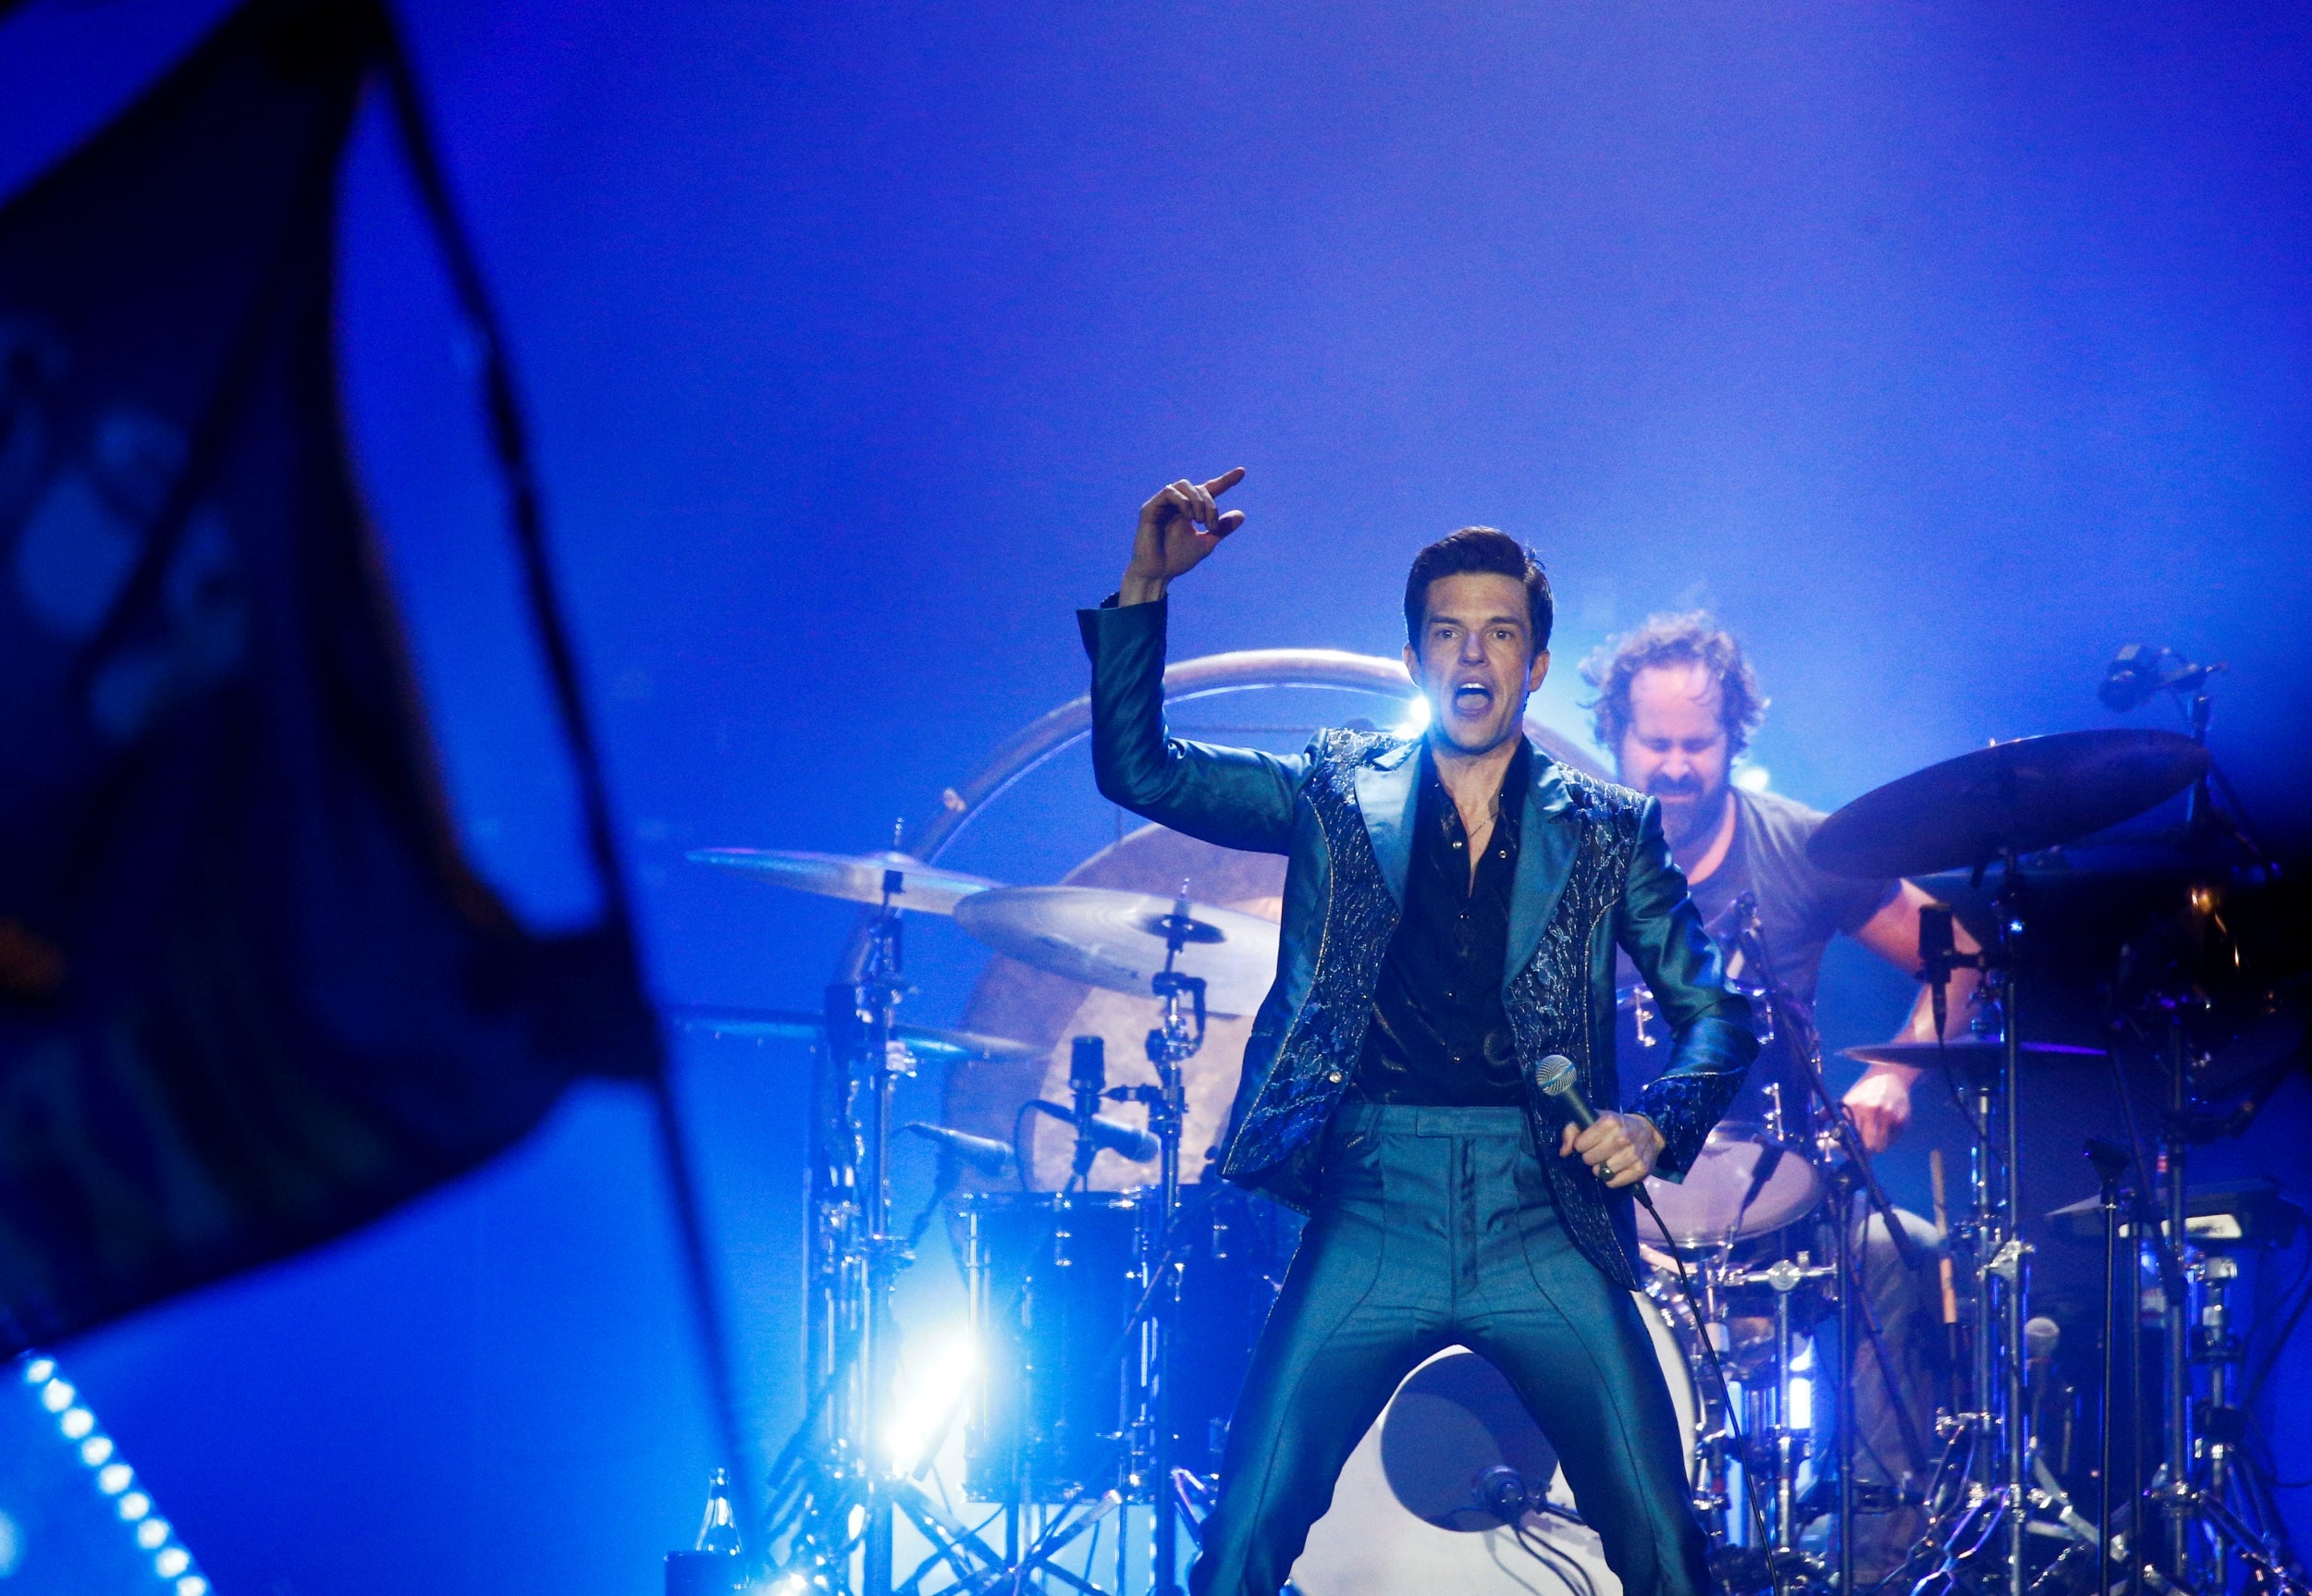 The Killers headlining Glastonbury in 2019 – 15 years after they played the New Tent